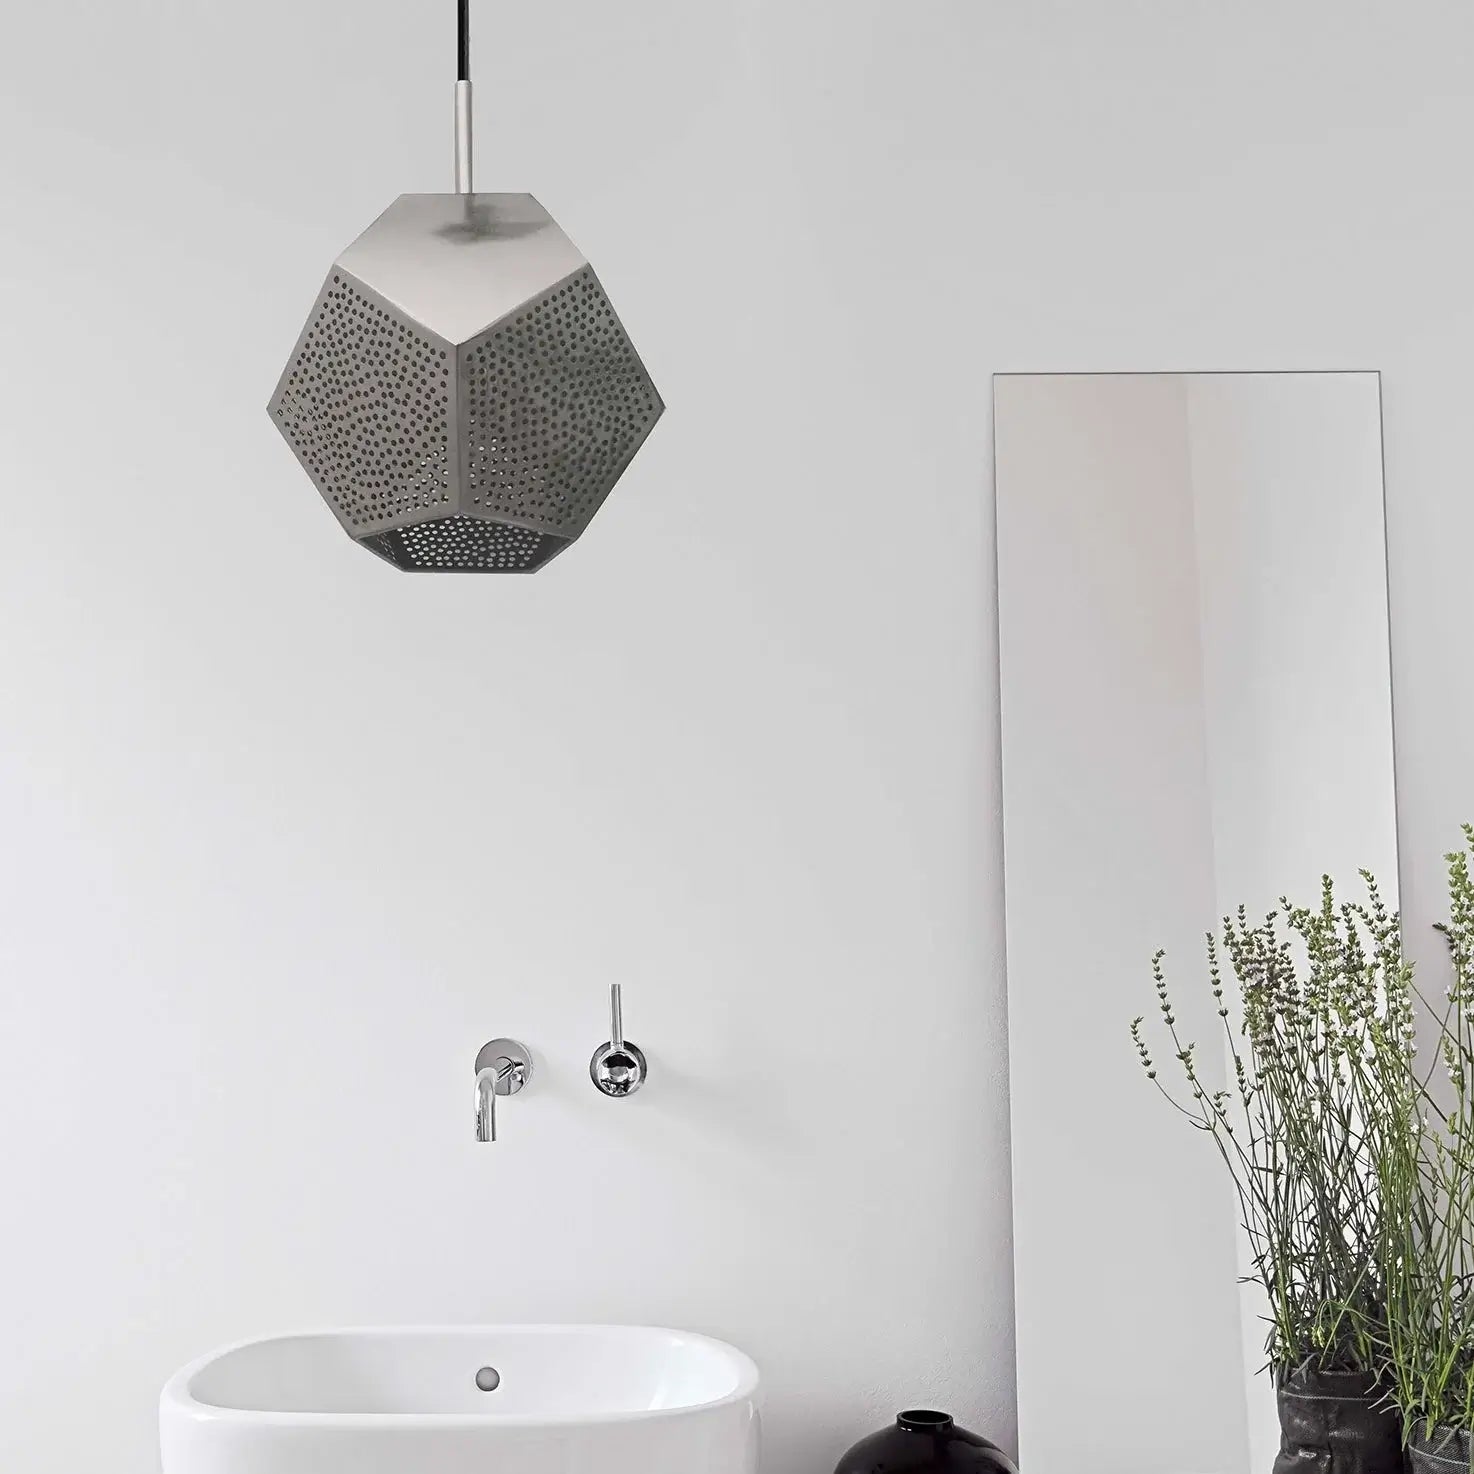 Dounia home Pendant light in nickel silver made of METAL,  used as a bathroom lighiting,  Model: Ula